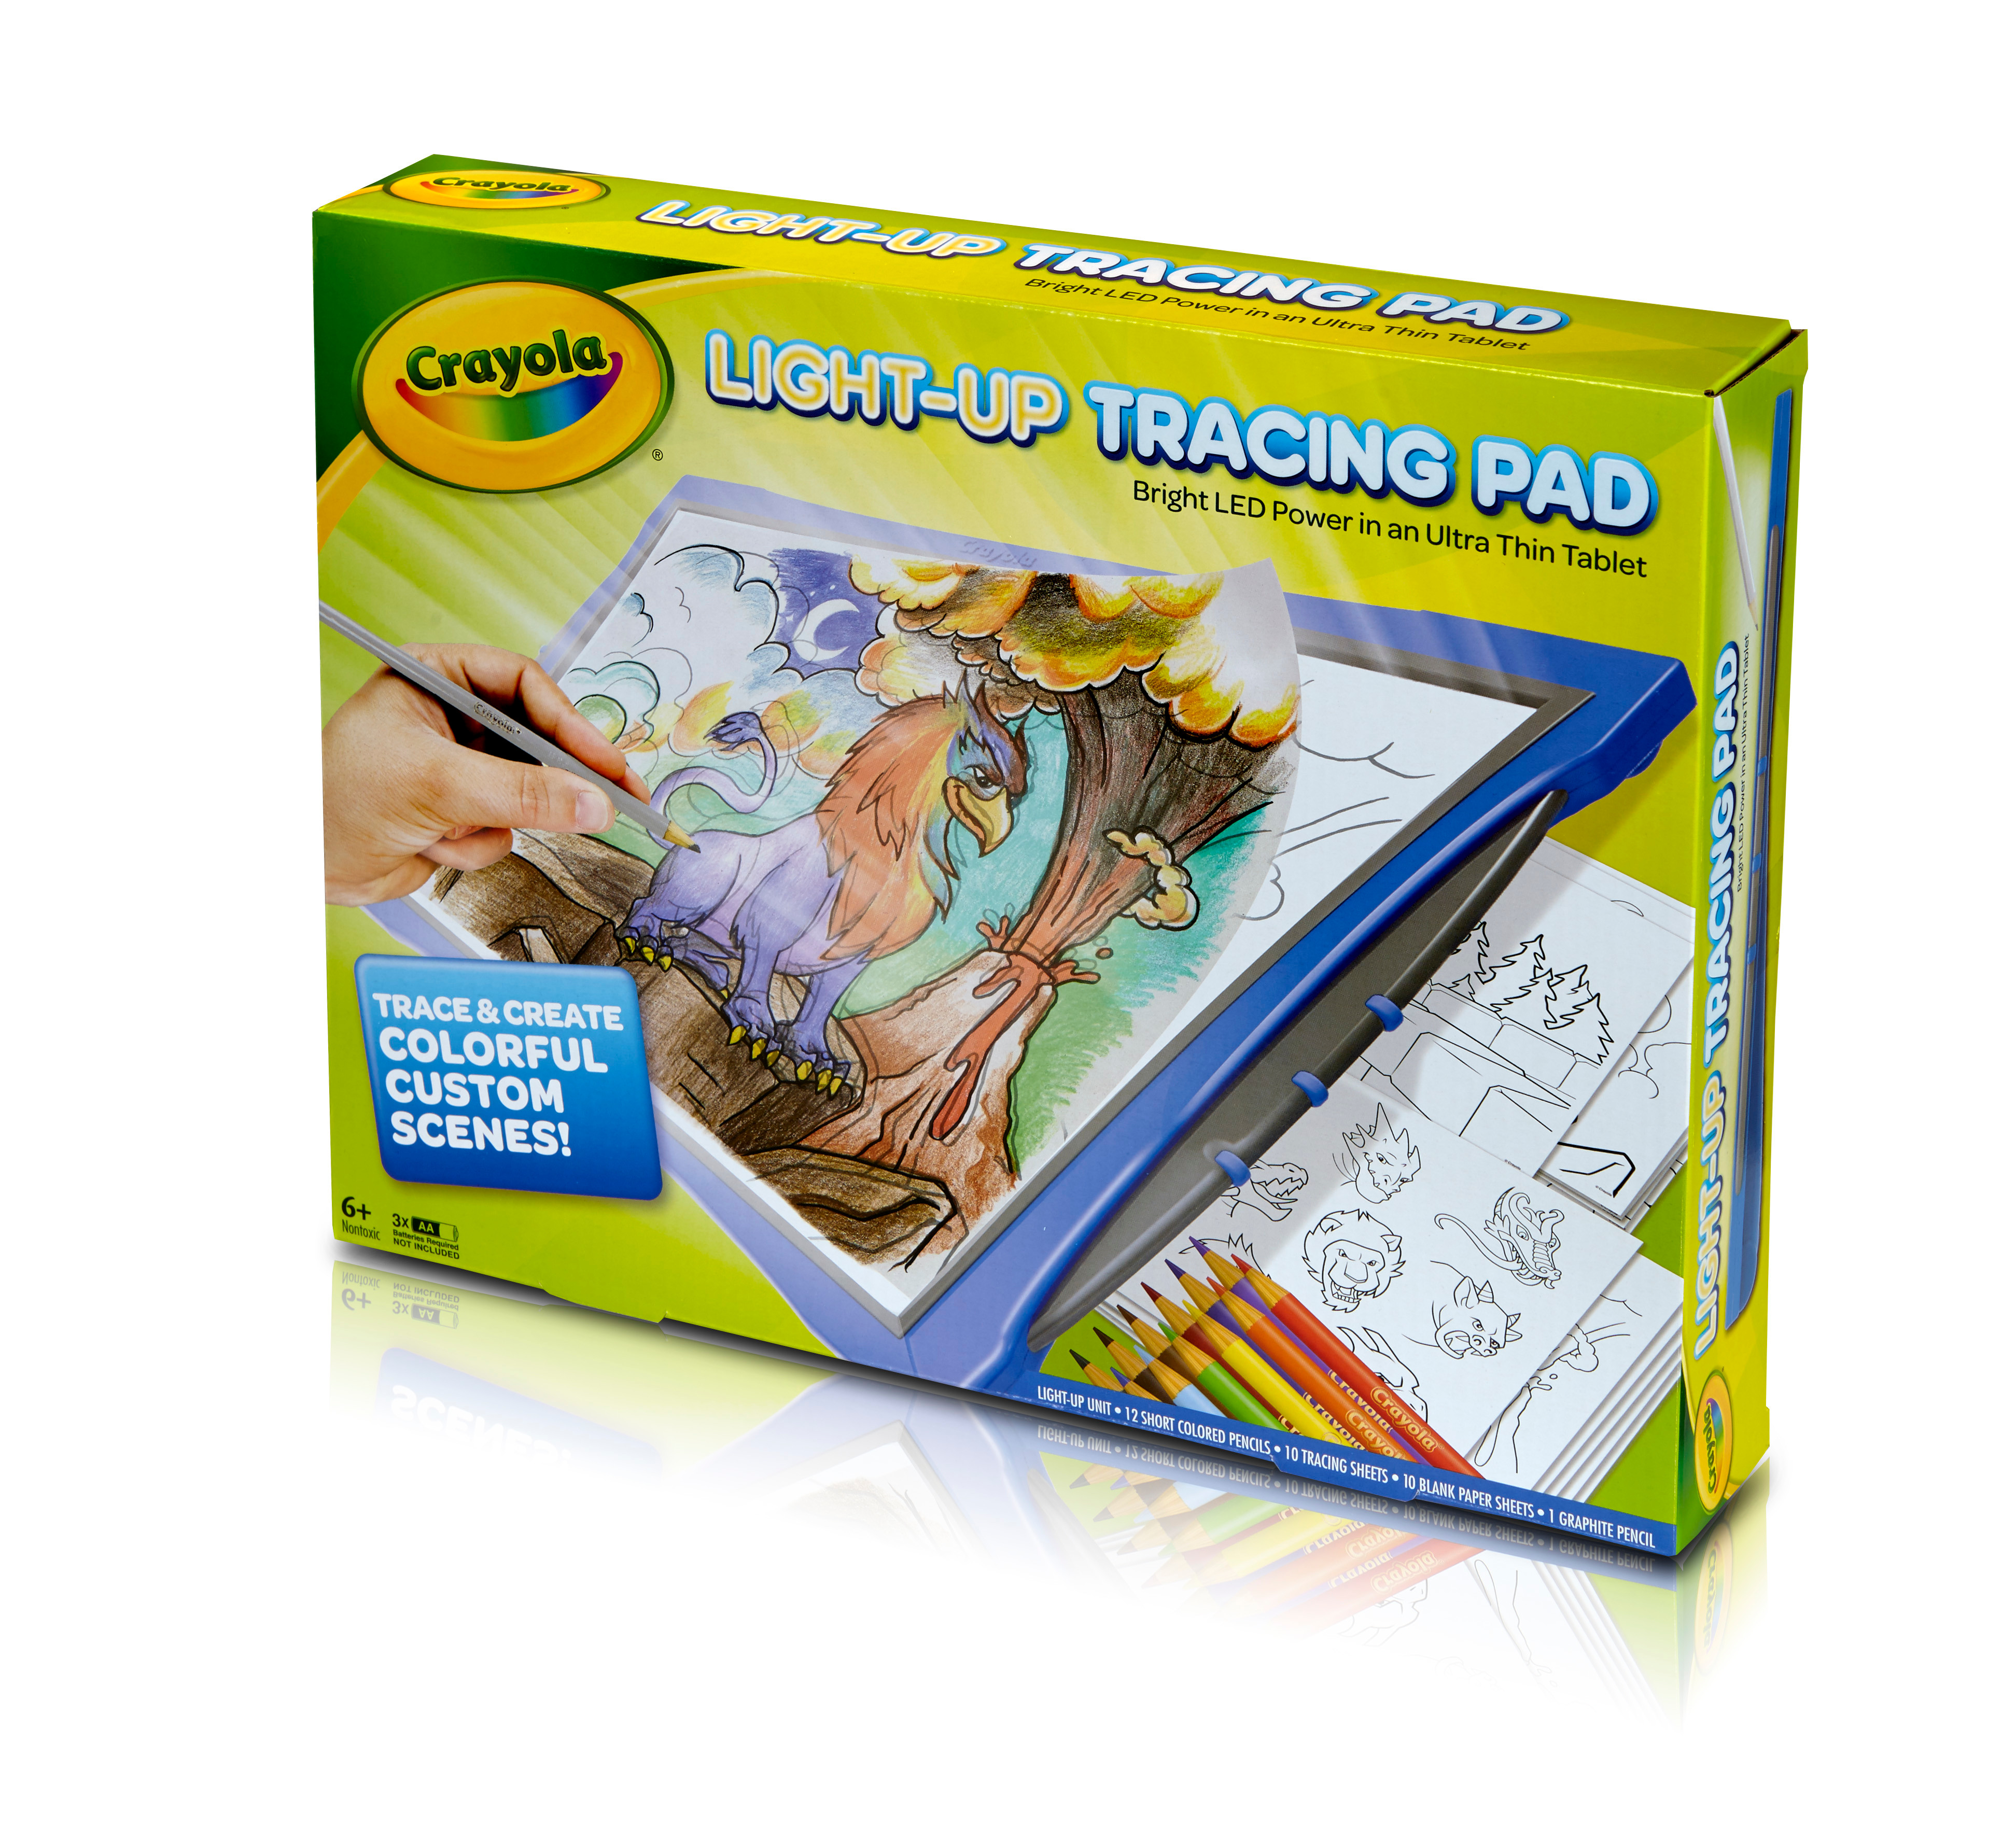 Crayola Light-Up Tracing Pad, Blue, School Supplies, Art Set, Gifts for Girls & Boys, Beginner Child - image 9 of 9